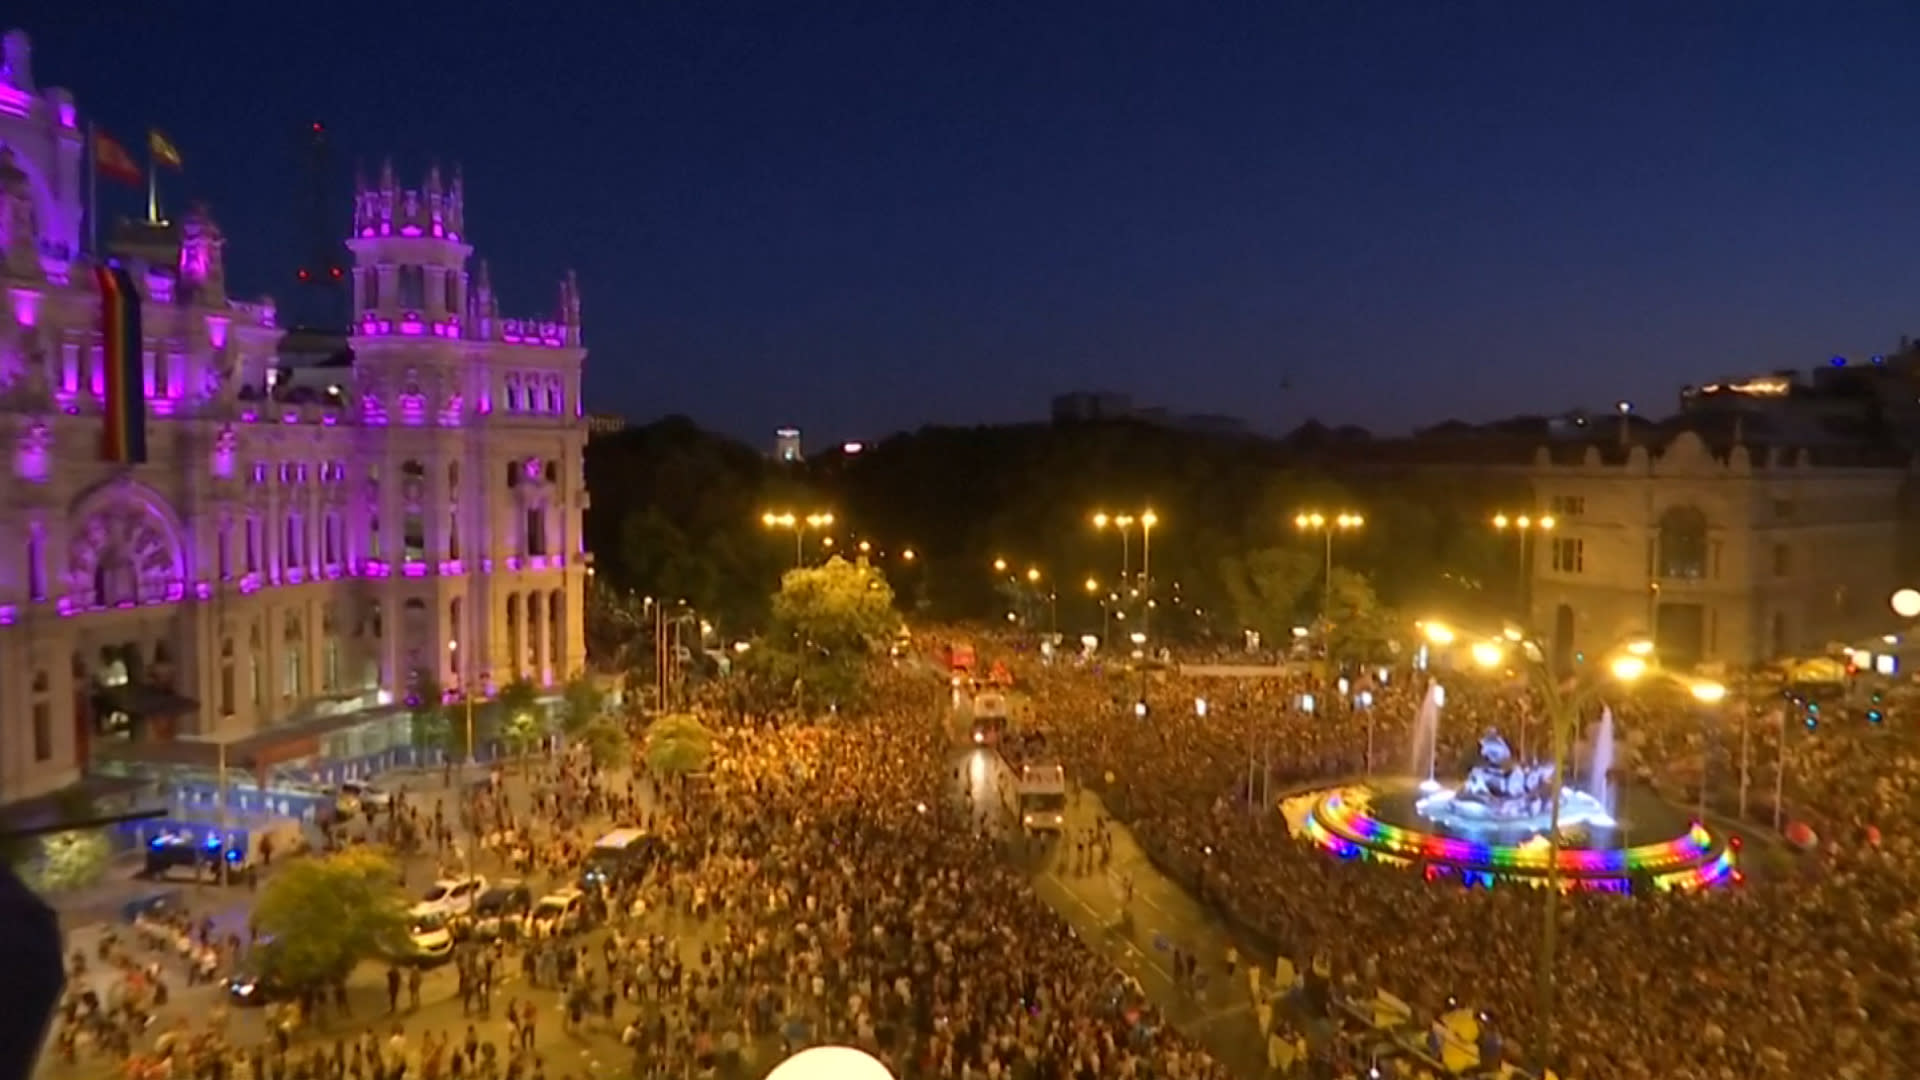 World Pride Parade In Madrid Parties For LGBT Rights [Video]